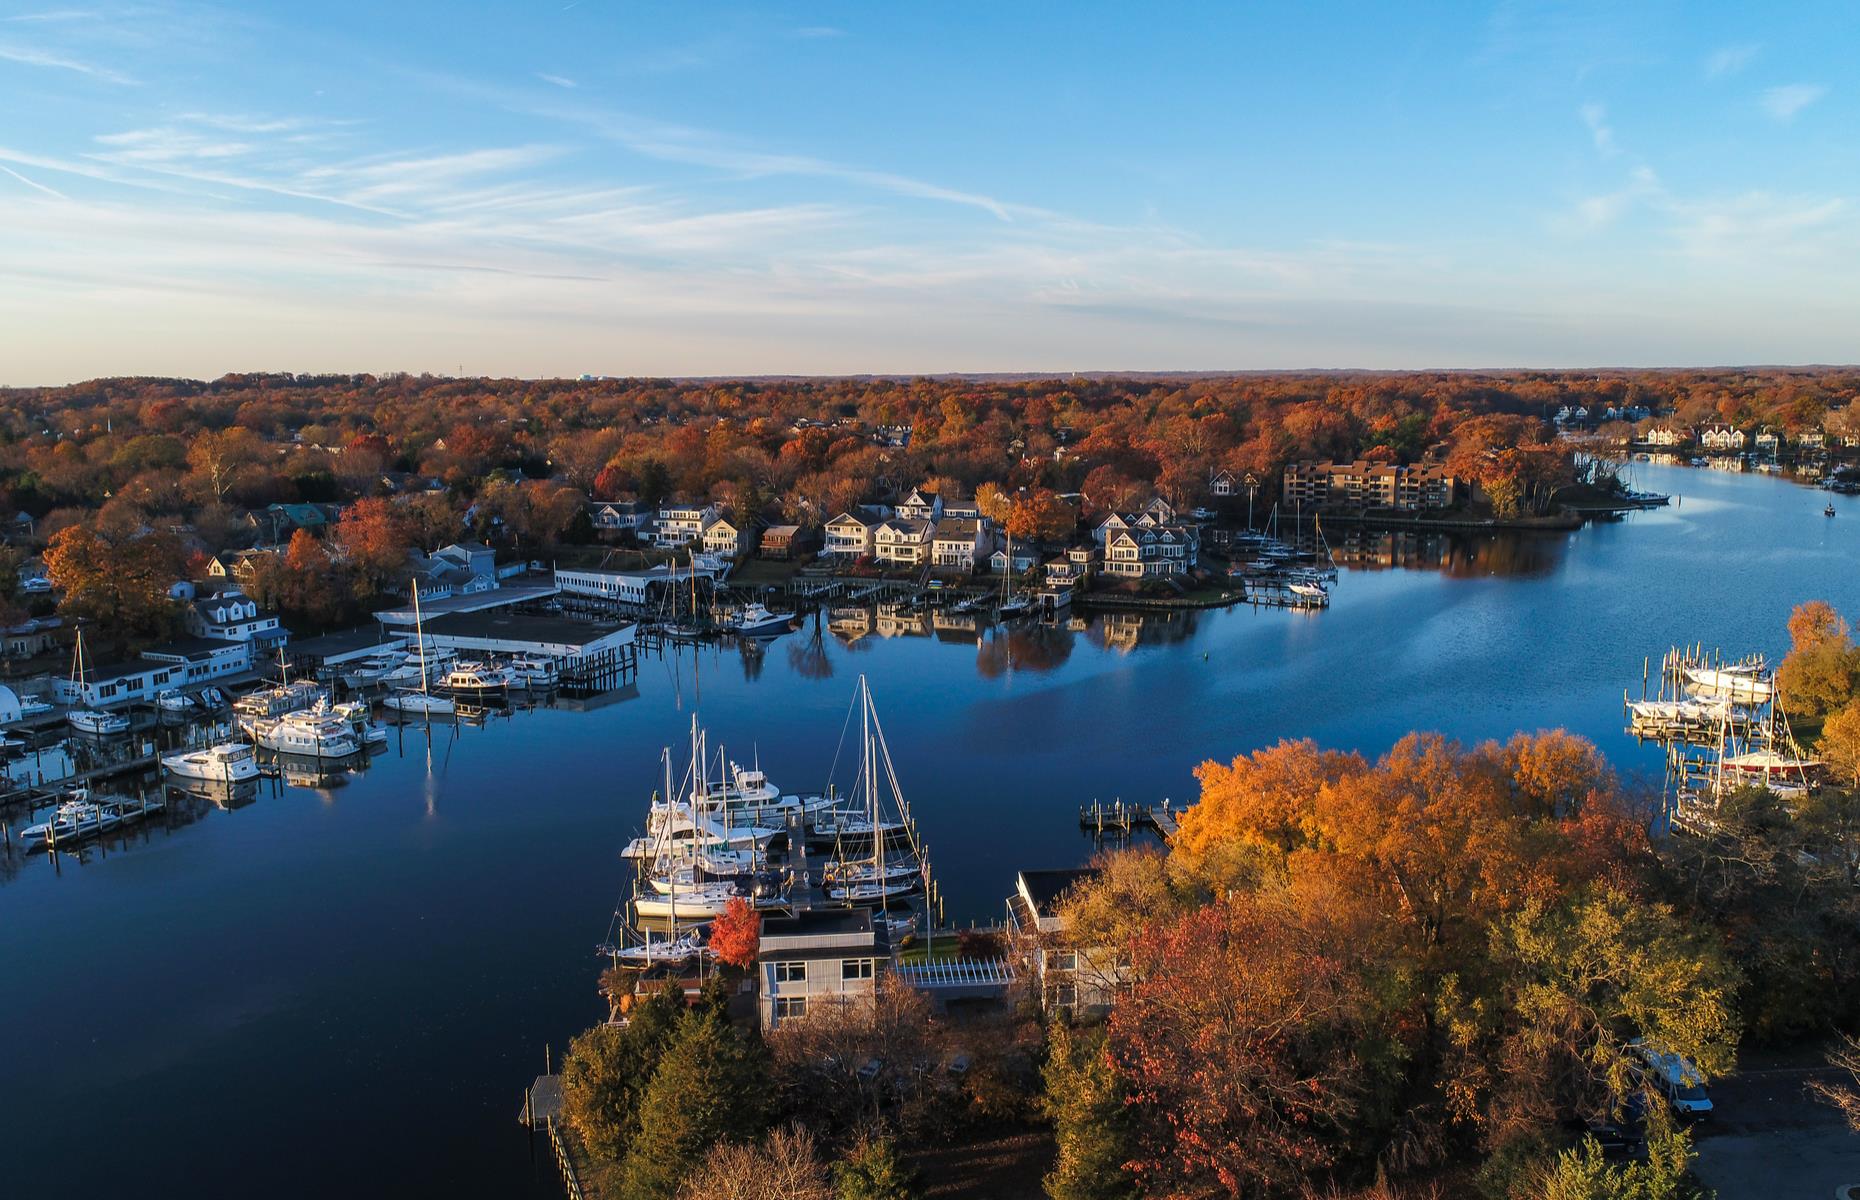 <p>Stretching from the state capital of Annapolis (pictured) to Huntingtown, this road trip follows the scenic Roots and Tides Byway, and explores a great swathe of Chesapeake Bay. The byway spools out for around 47 miles (76km), traveling along the coast and amounting to around one hour 30 minutes of driving time. Pushing south, the route is studded with views of the water and historic spots to park up. </p>